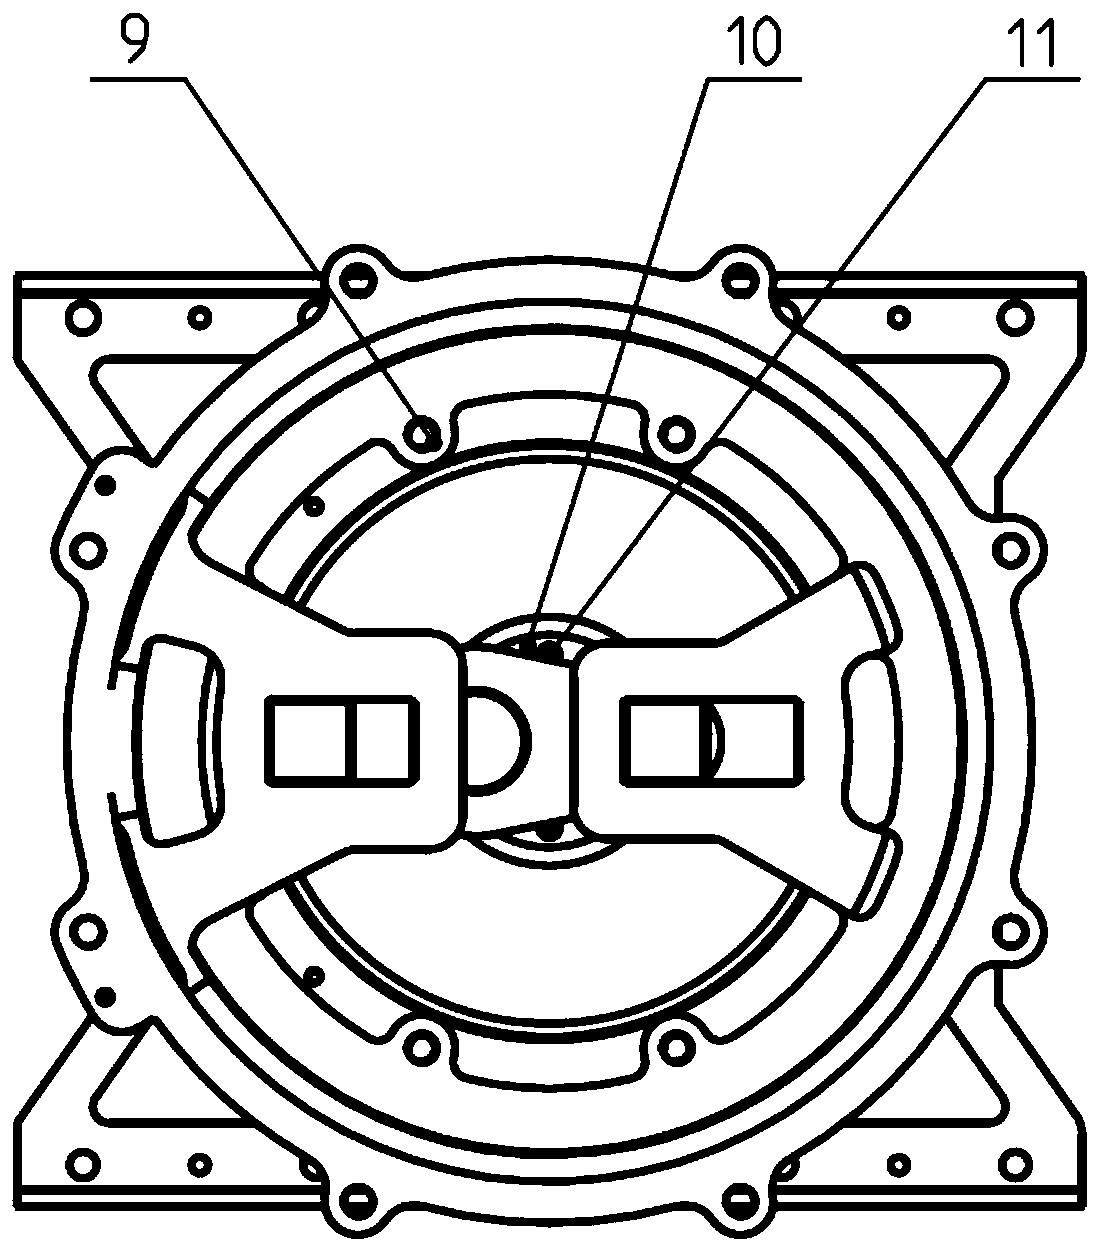 A High Precision Rotary Positioning Mechanism